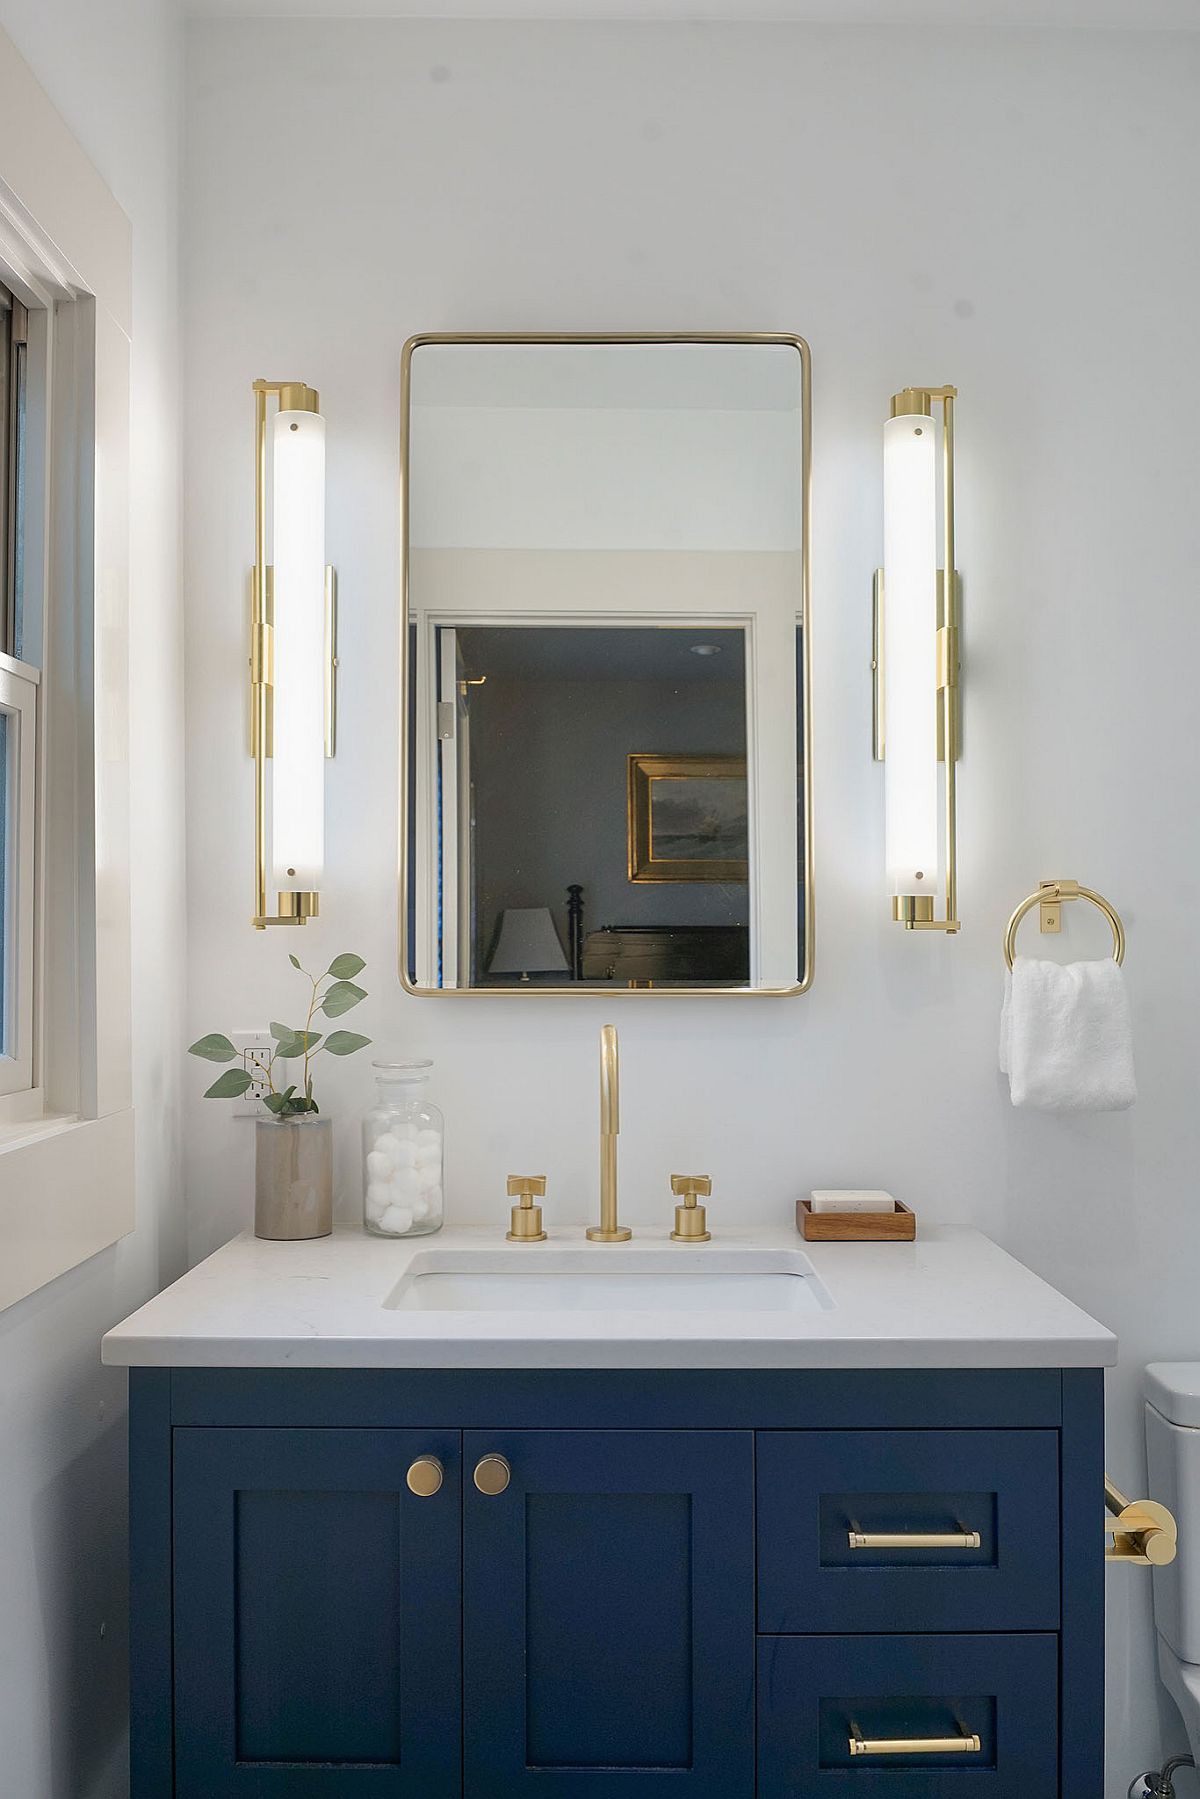 Combining-gold-accents-with-the-dashing-blue-vanity-in-the-modern-bathroom-16433